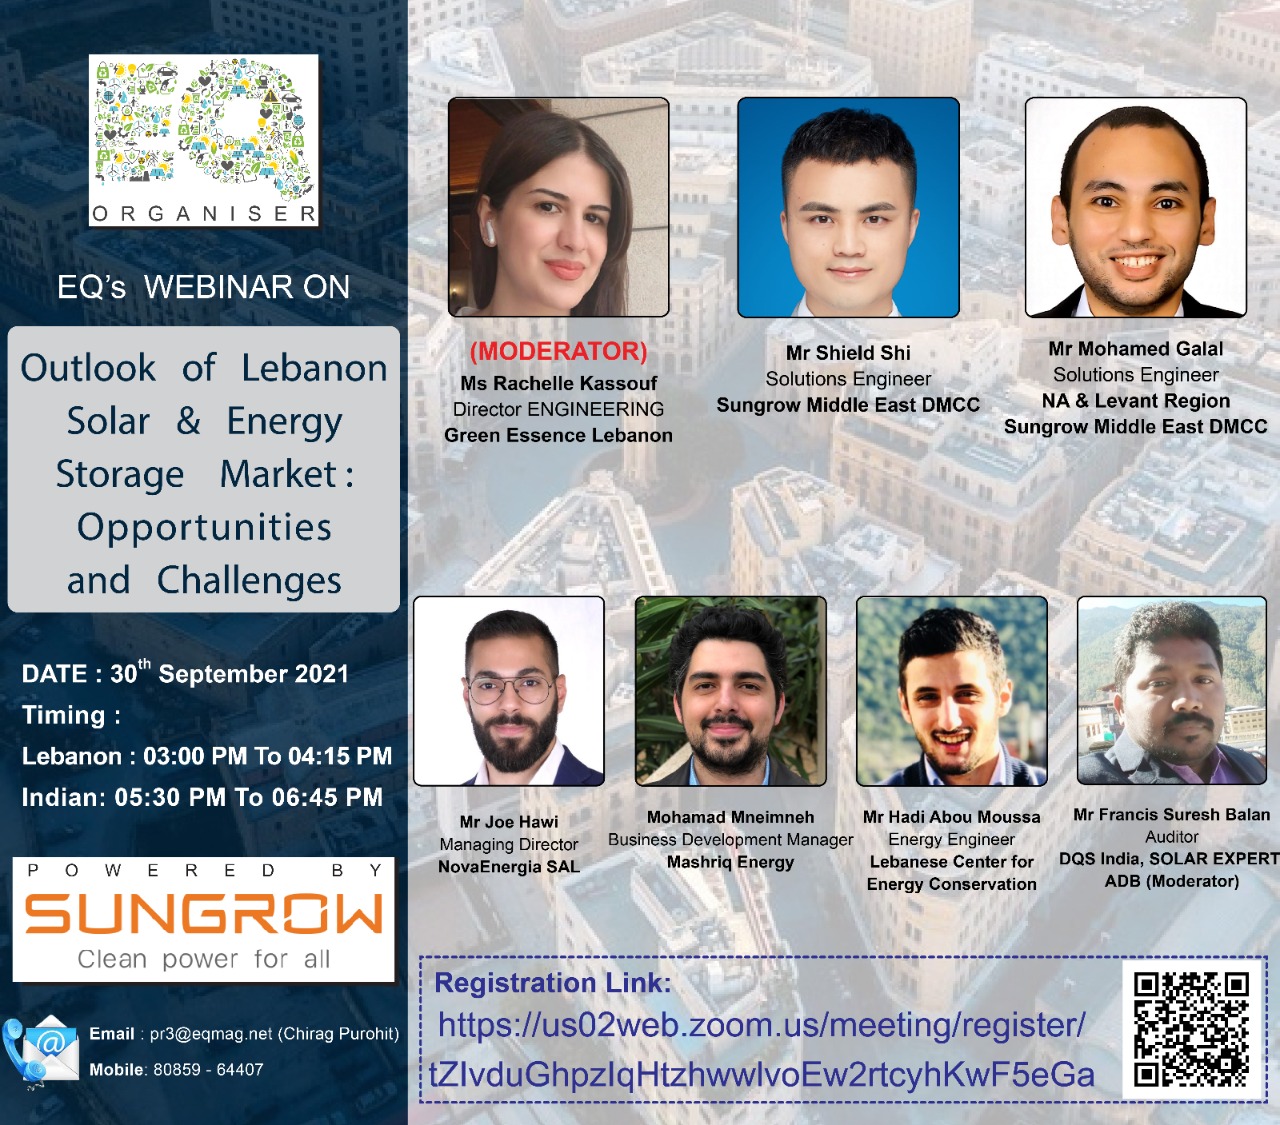 EQ Webinar on Outlook of Lebanon Solar & Energy Storage Market Powered by Sungrow On Thursday September 30th From 3:00 PM Onwards…. Register Now !!!